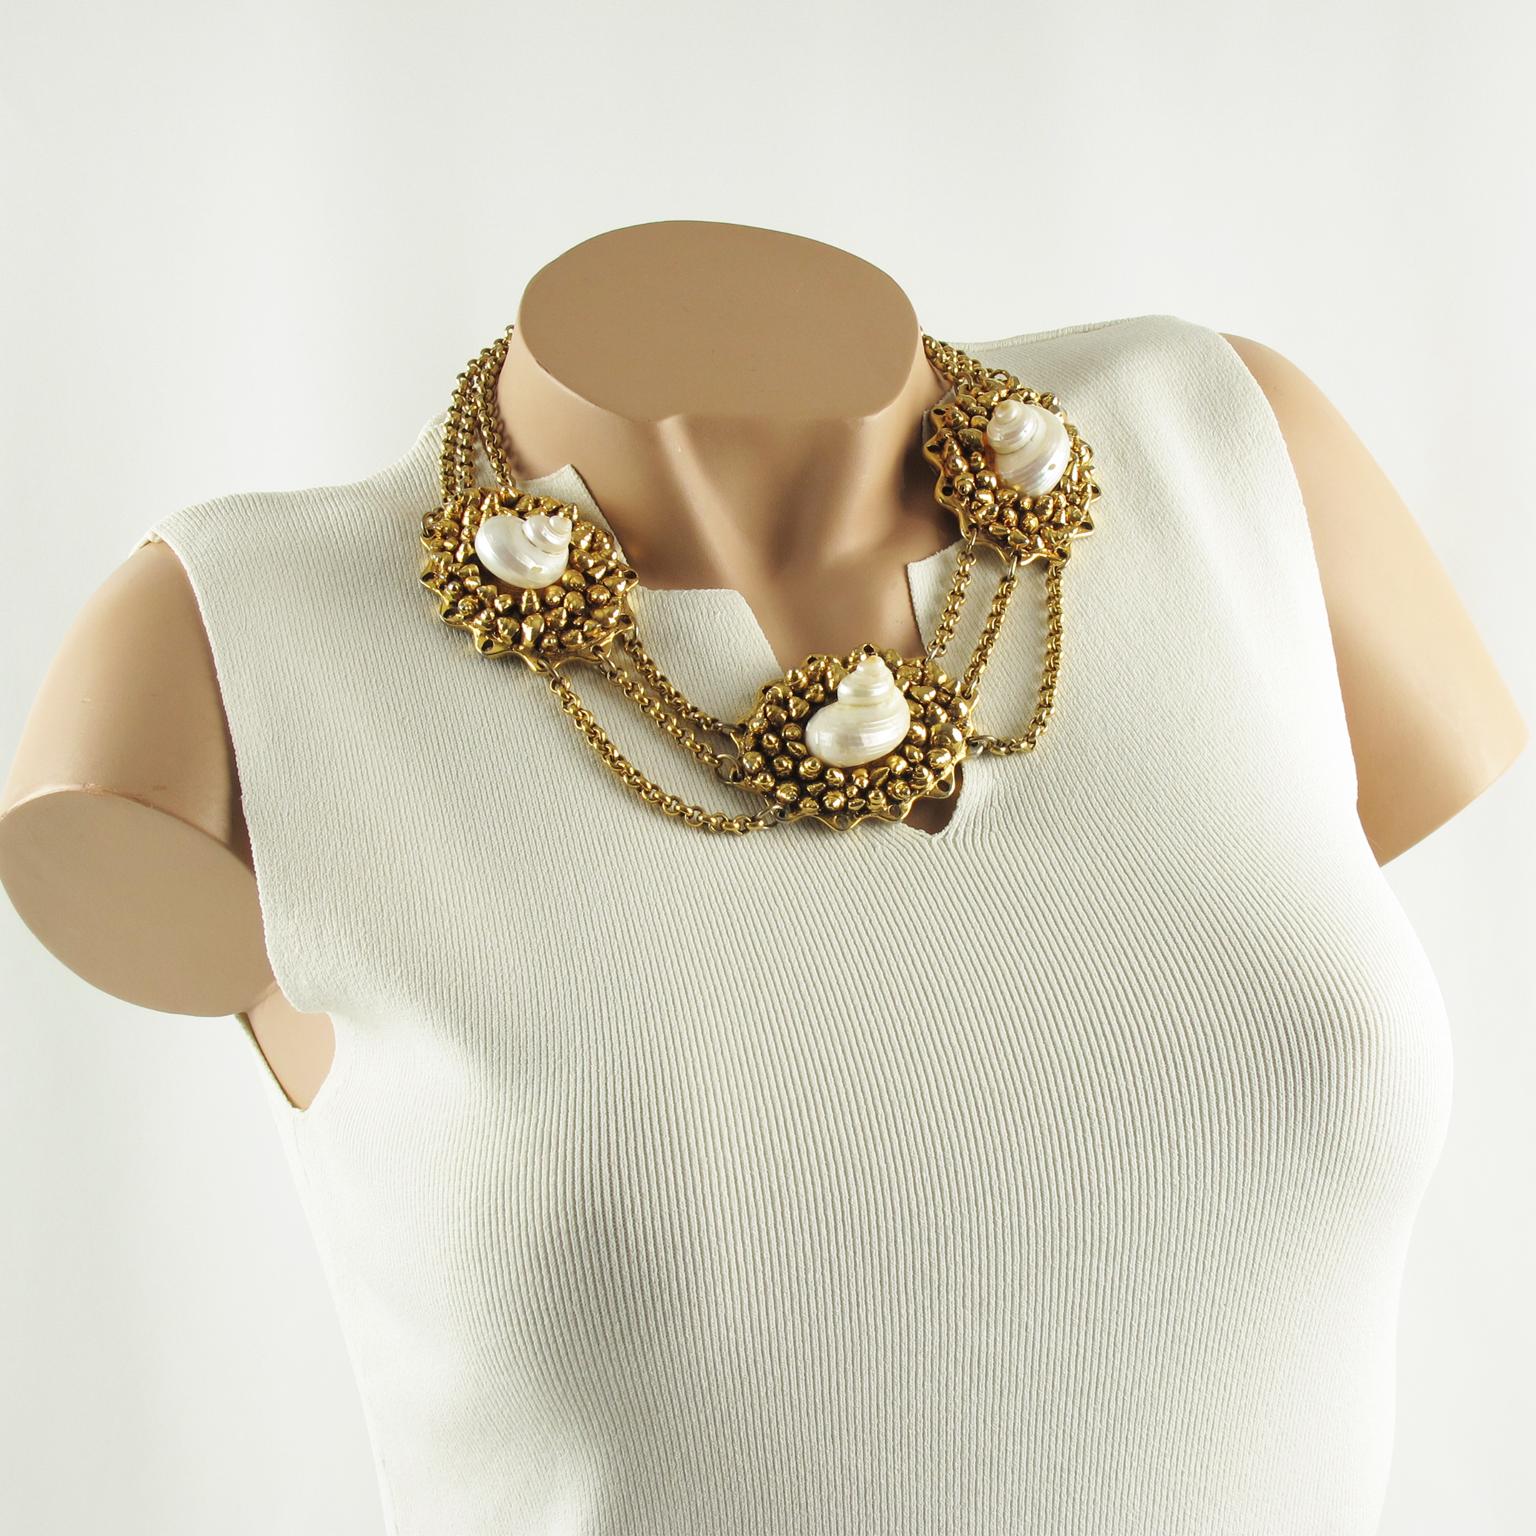 This stunning French fashion designer Chantal Thomass Paris choker necklace features a multi-strand gilded metal chain embellished with three huge medallions. Each medallion consists of gilt metal-coated resin with tiny seashells carved and